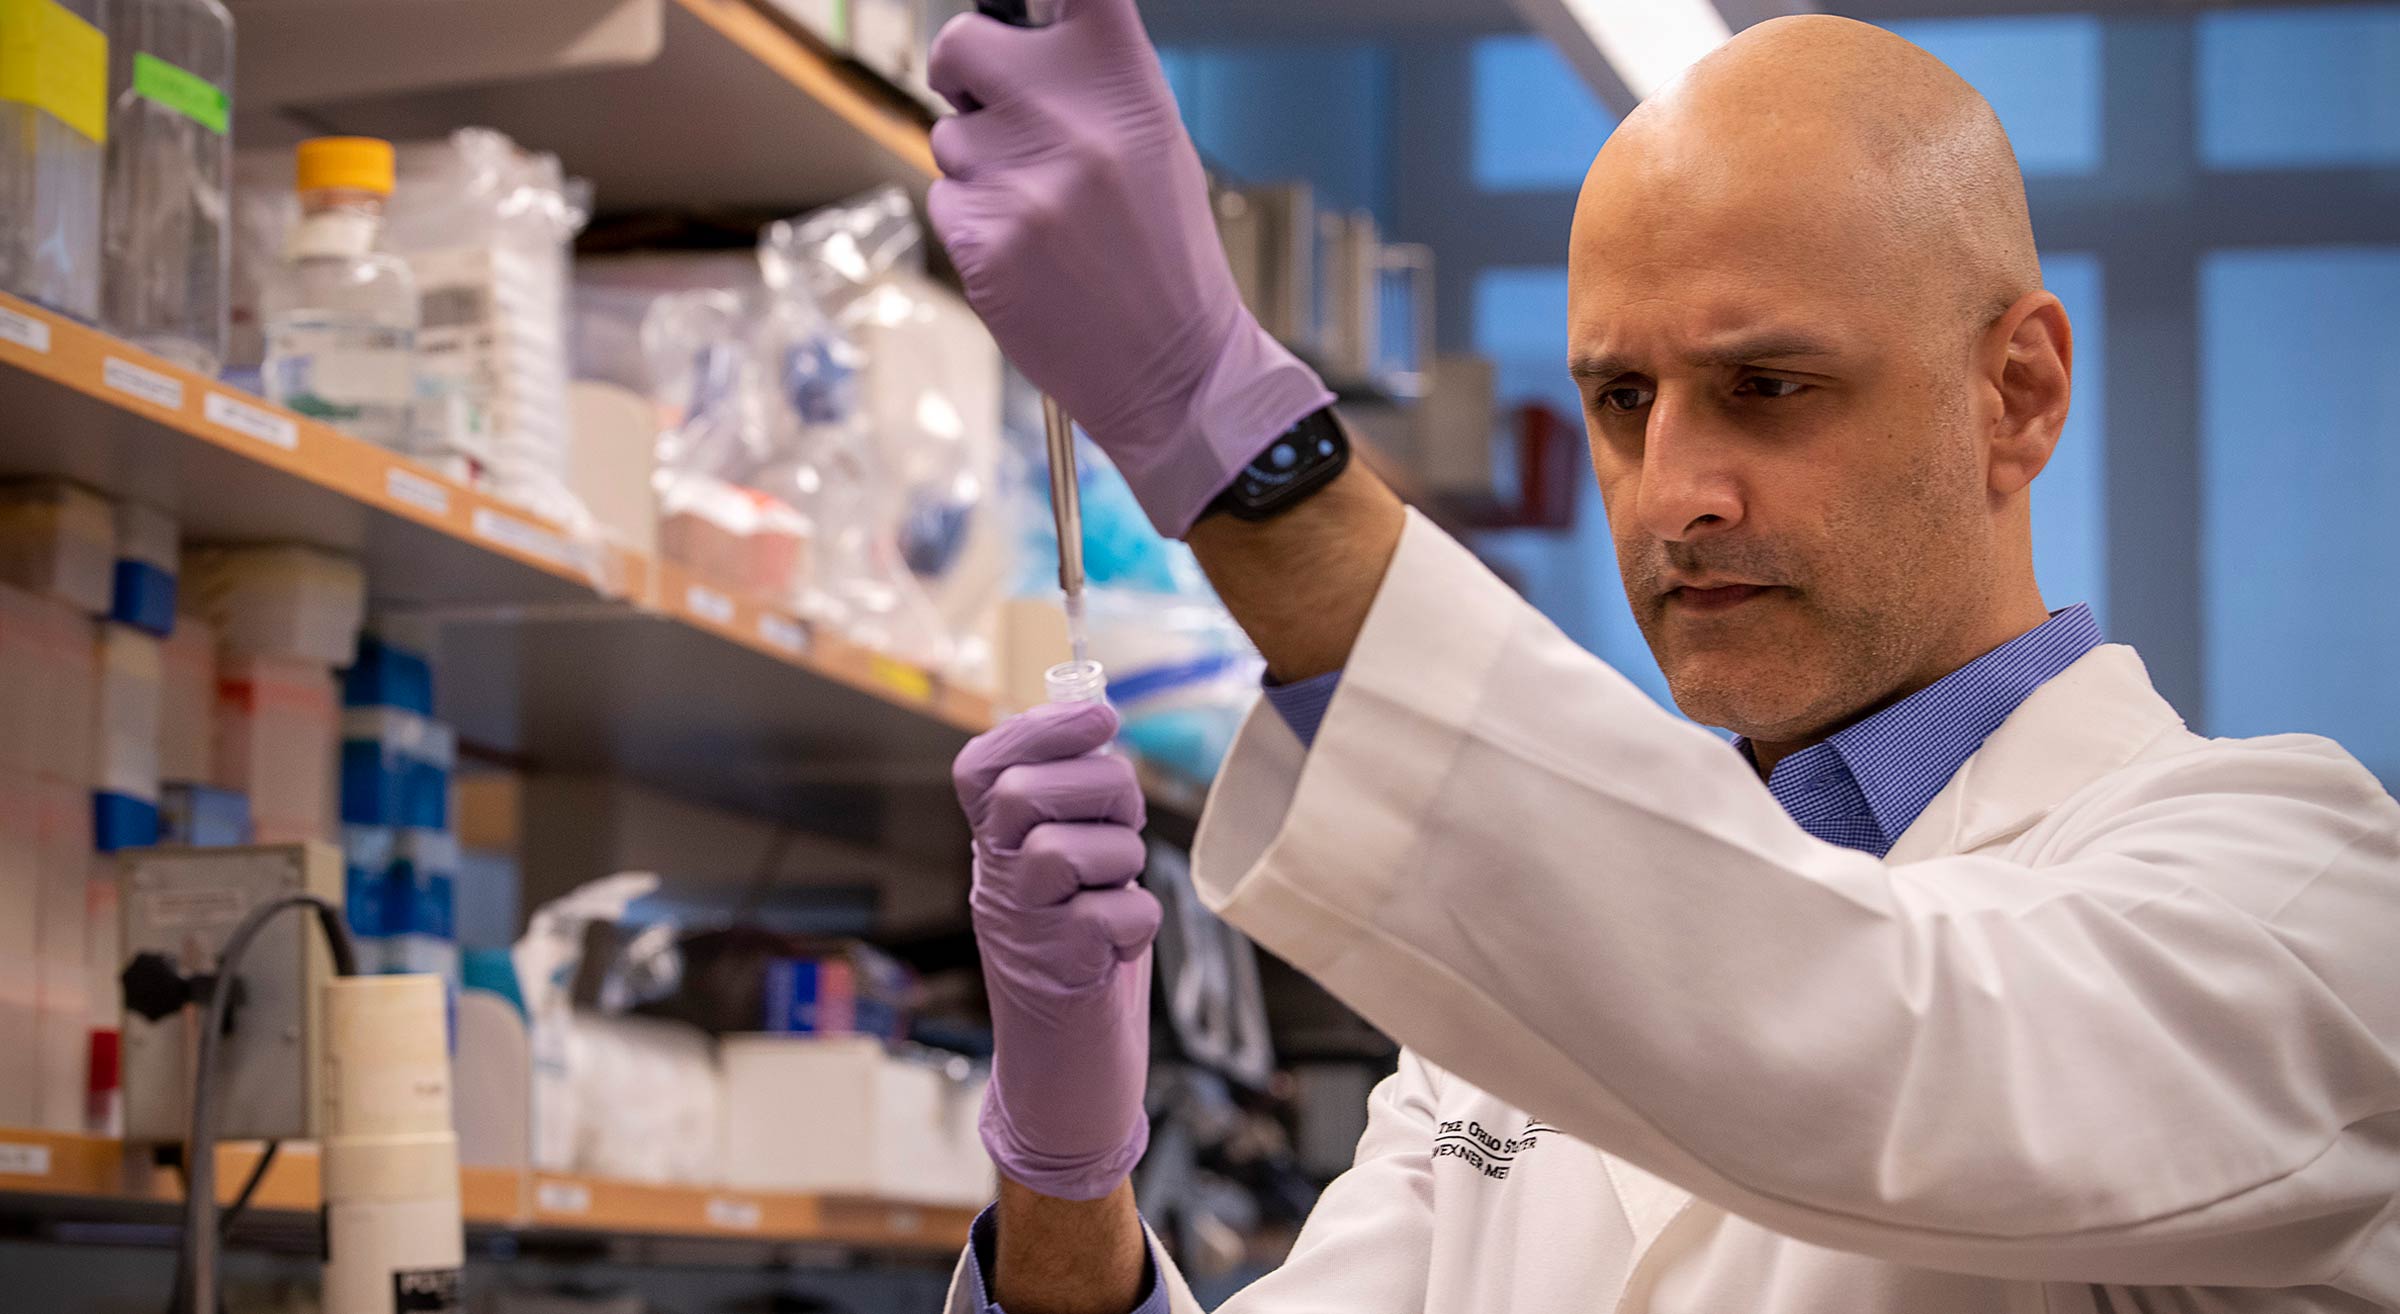 Dr. Shahid Nimjee working in his lab at Ohio State